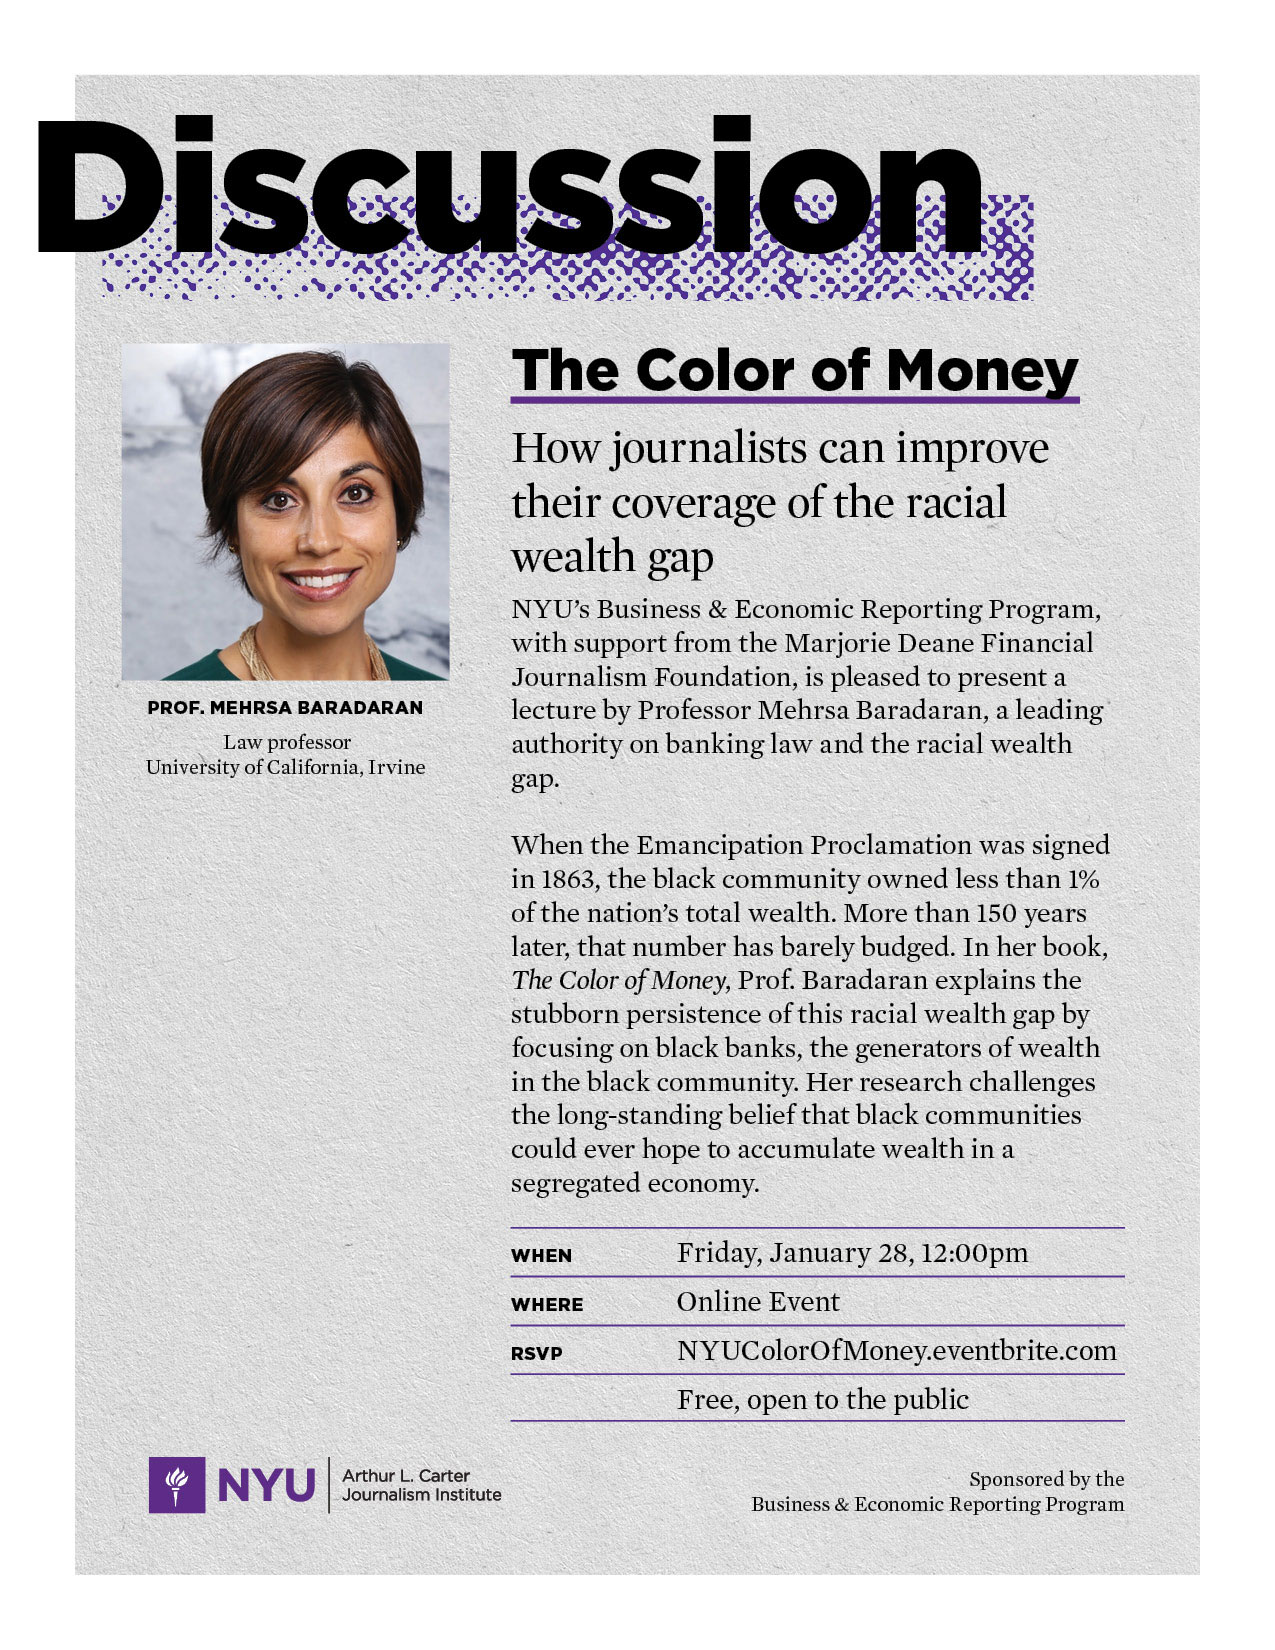 Event Poster - Discussion: The Color of Money - Jan 28 - See event page for details